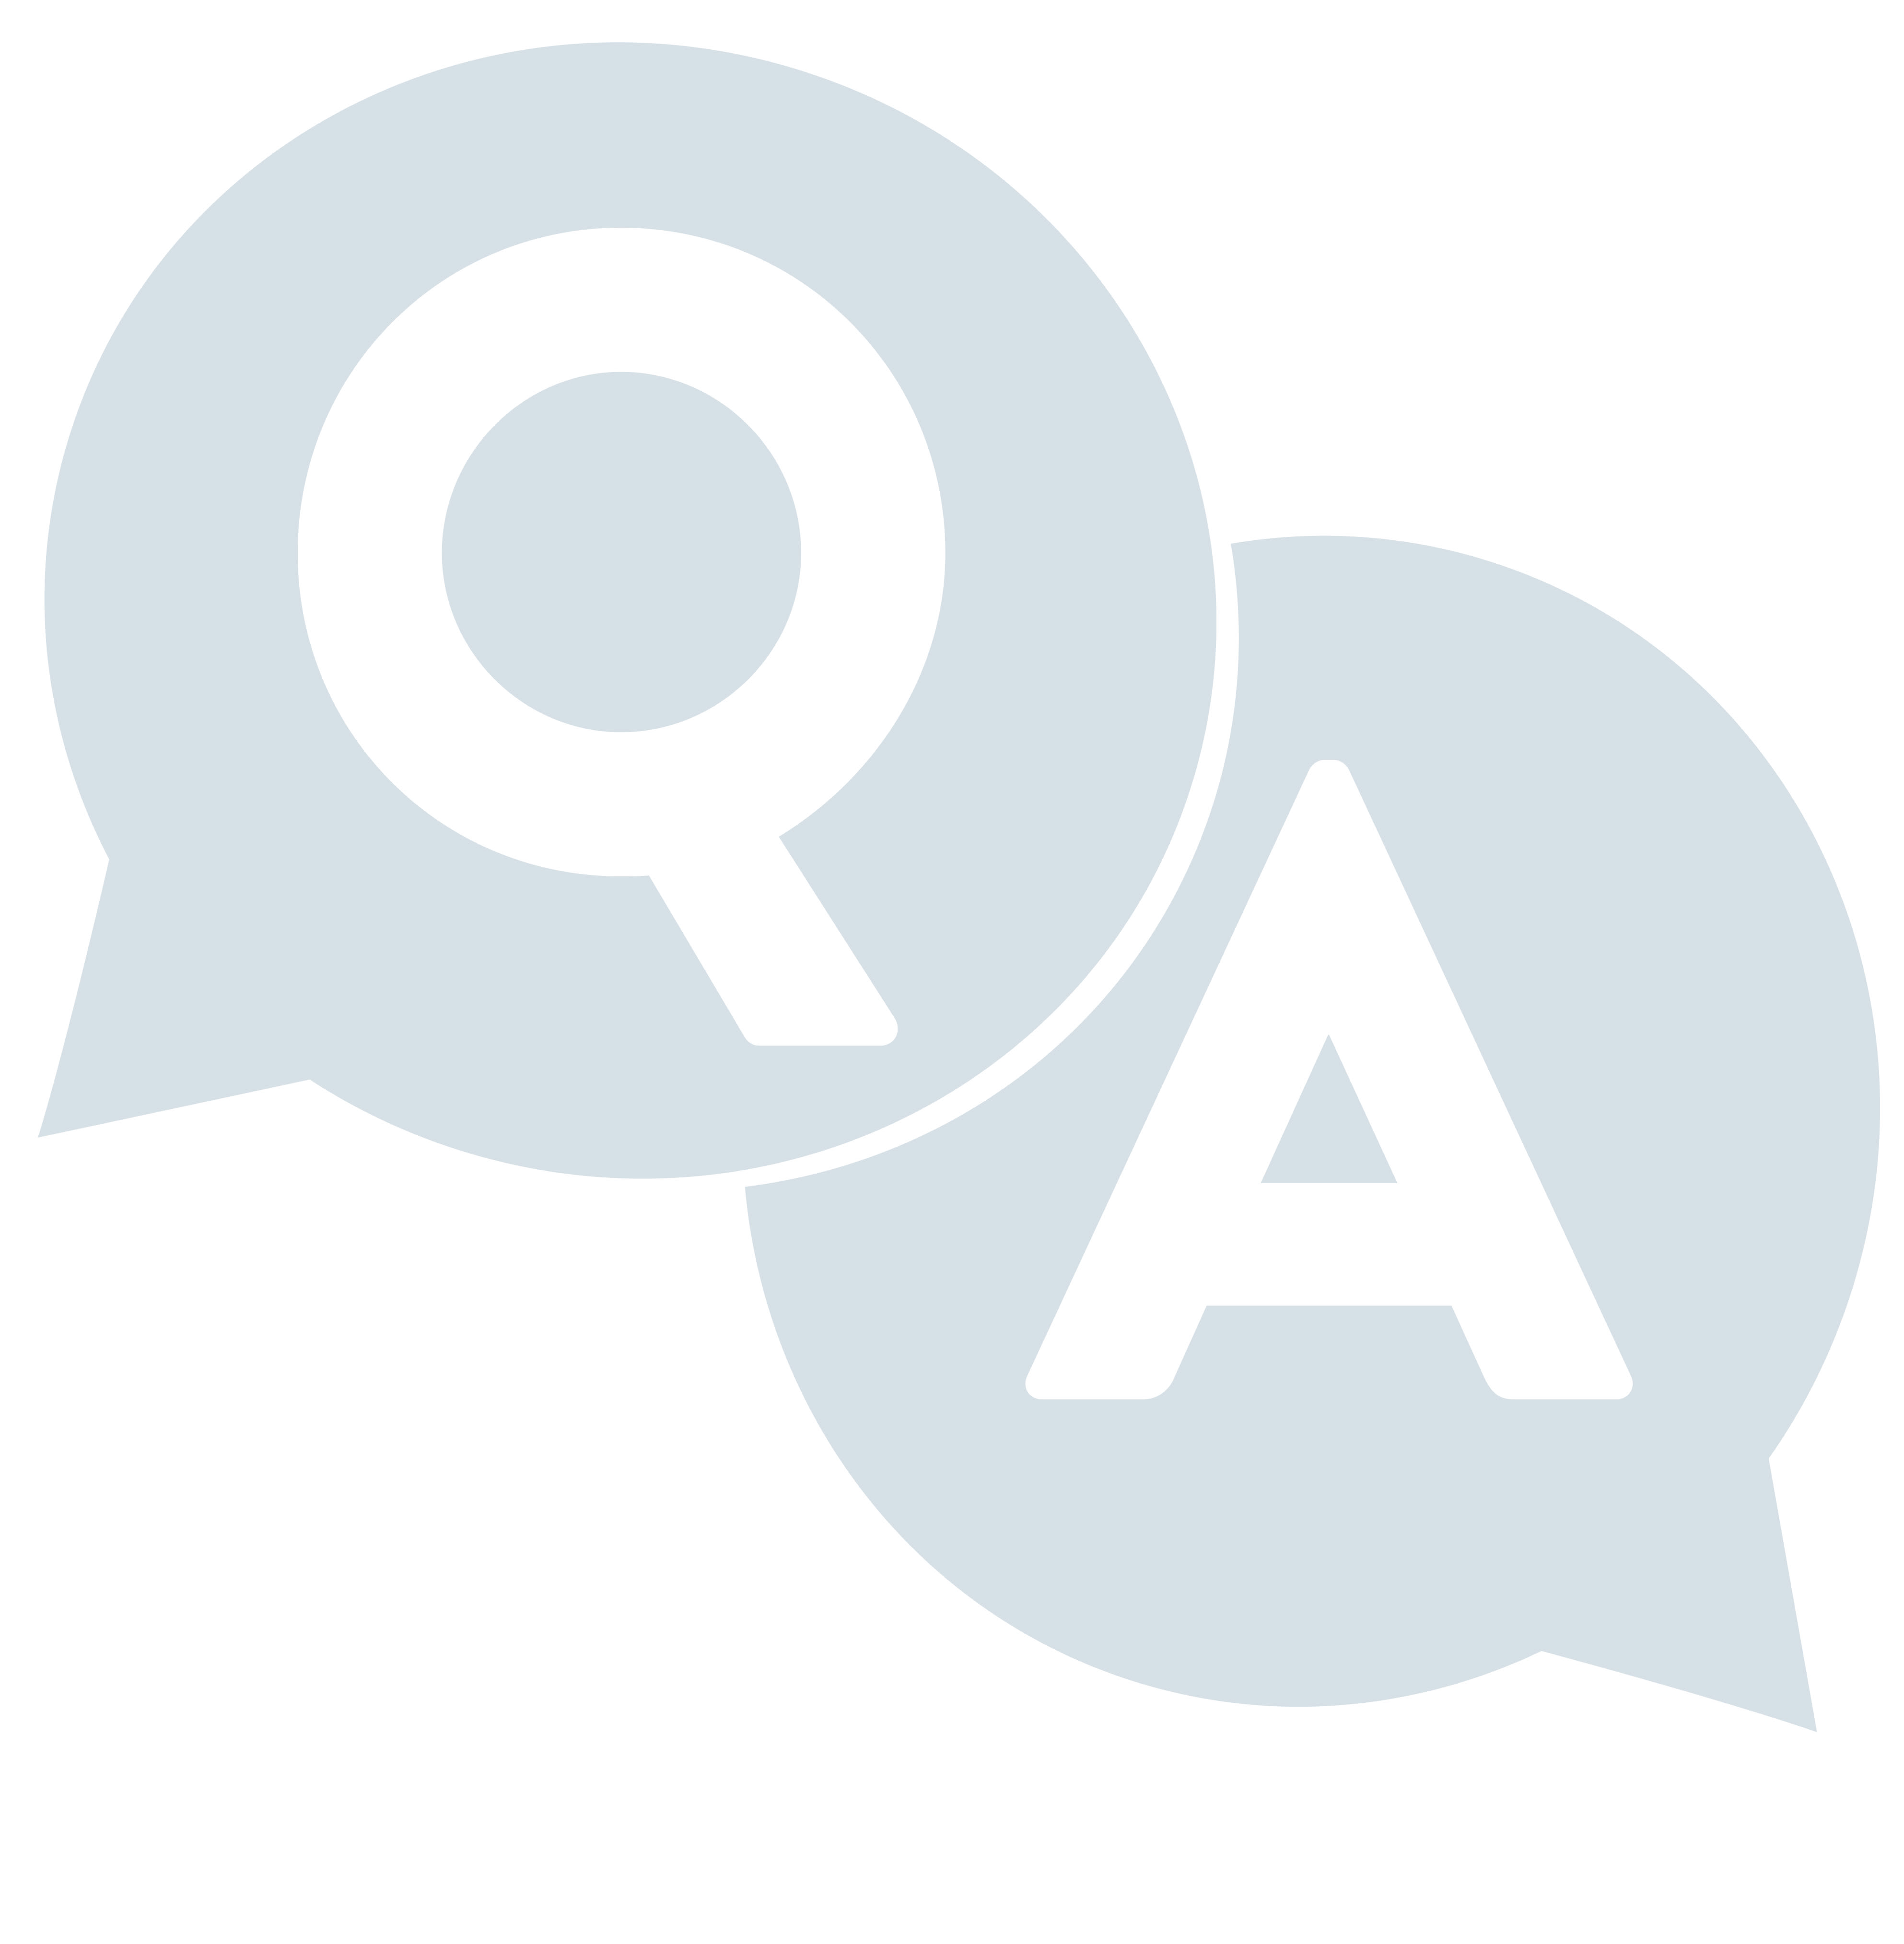 questions and answers icon